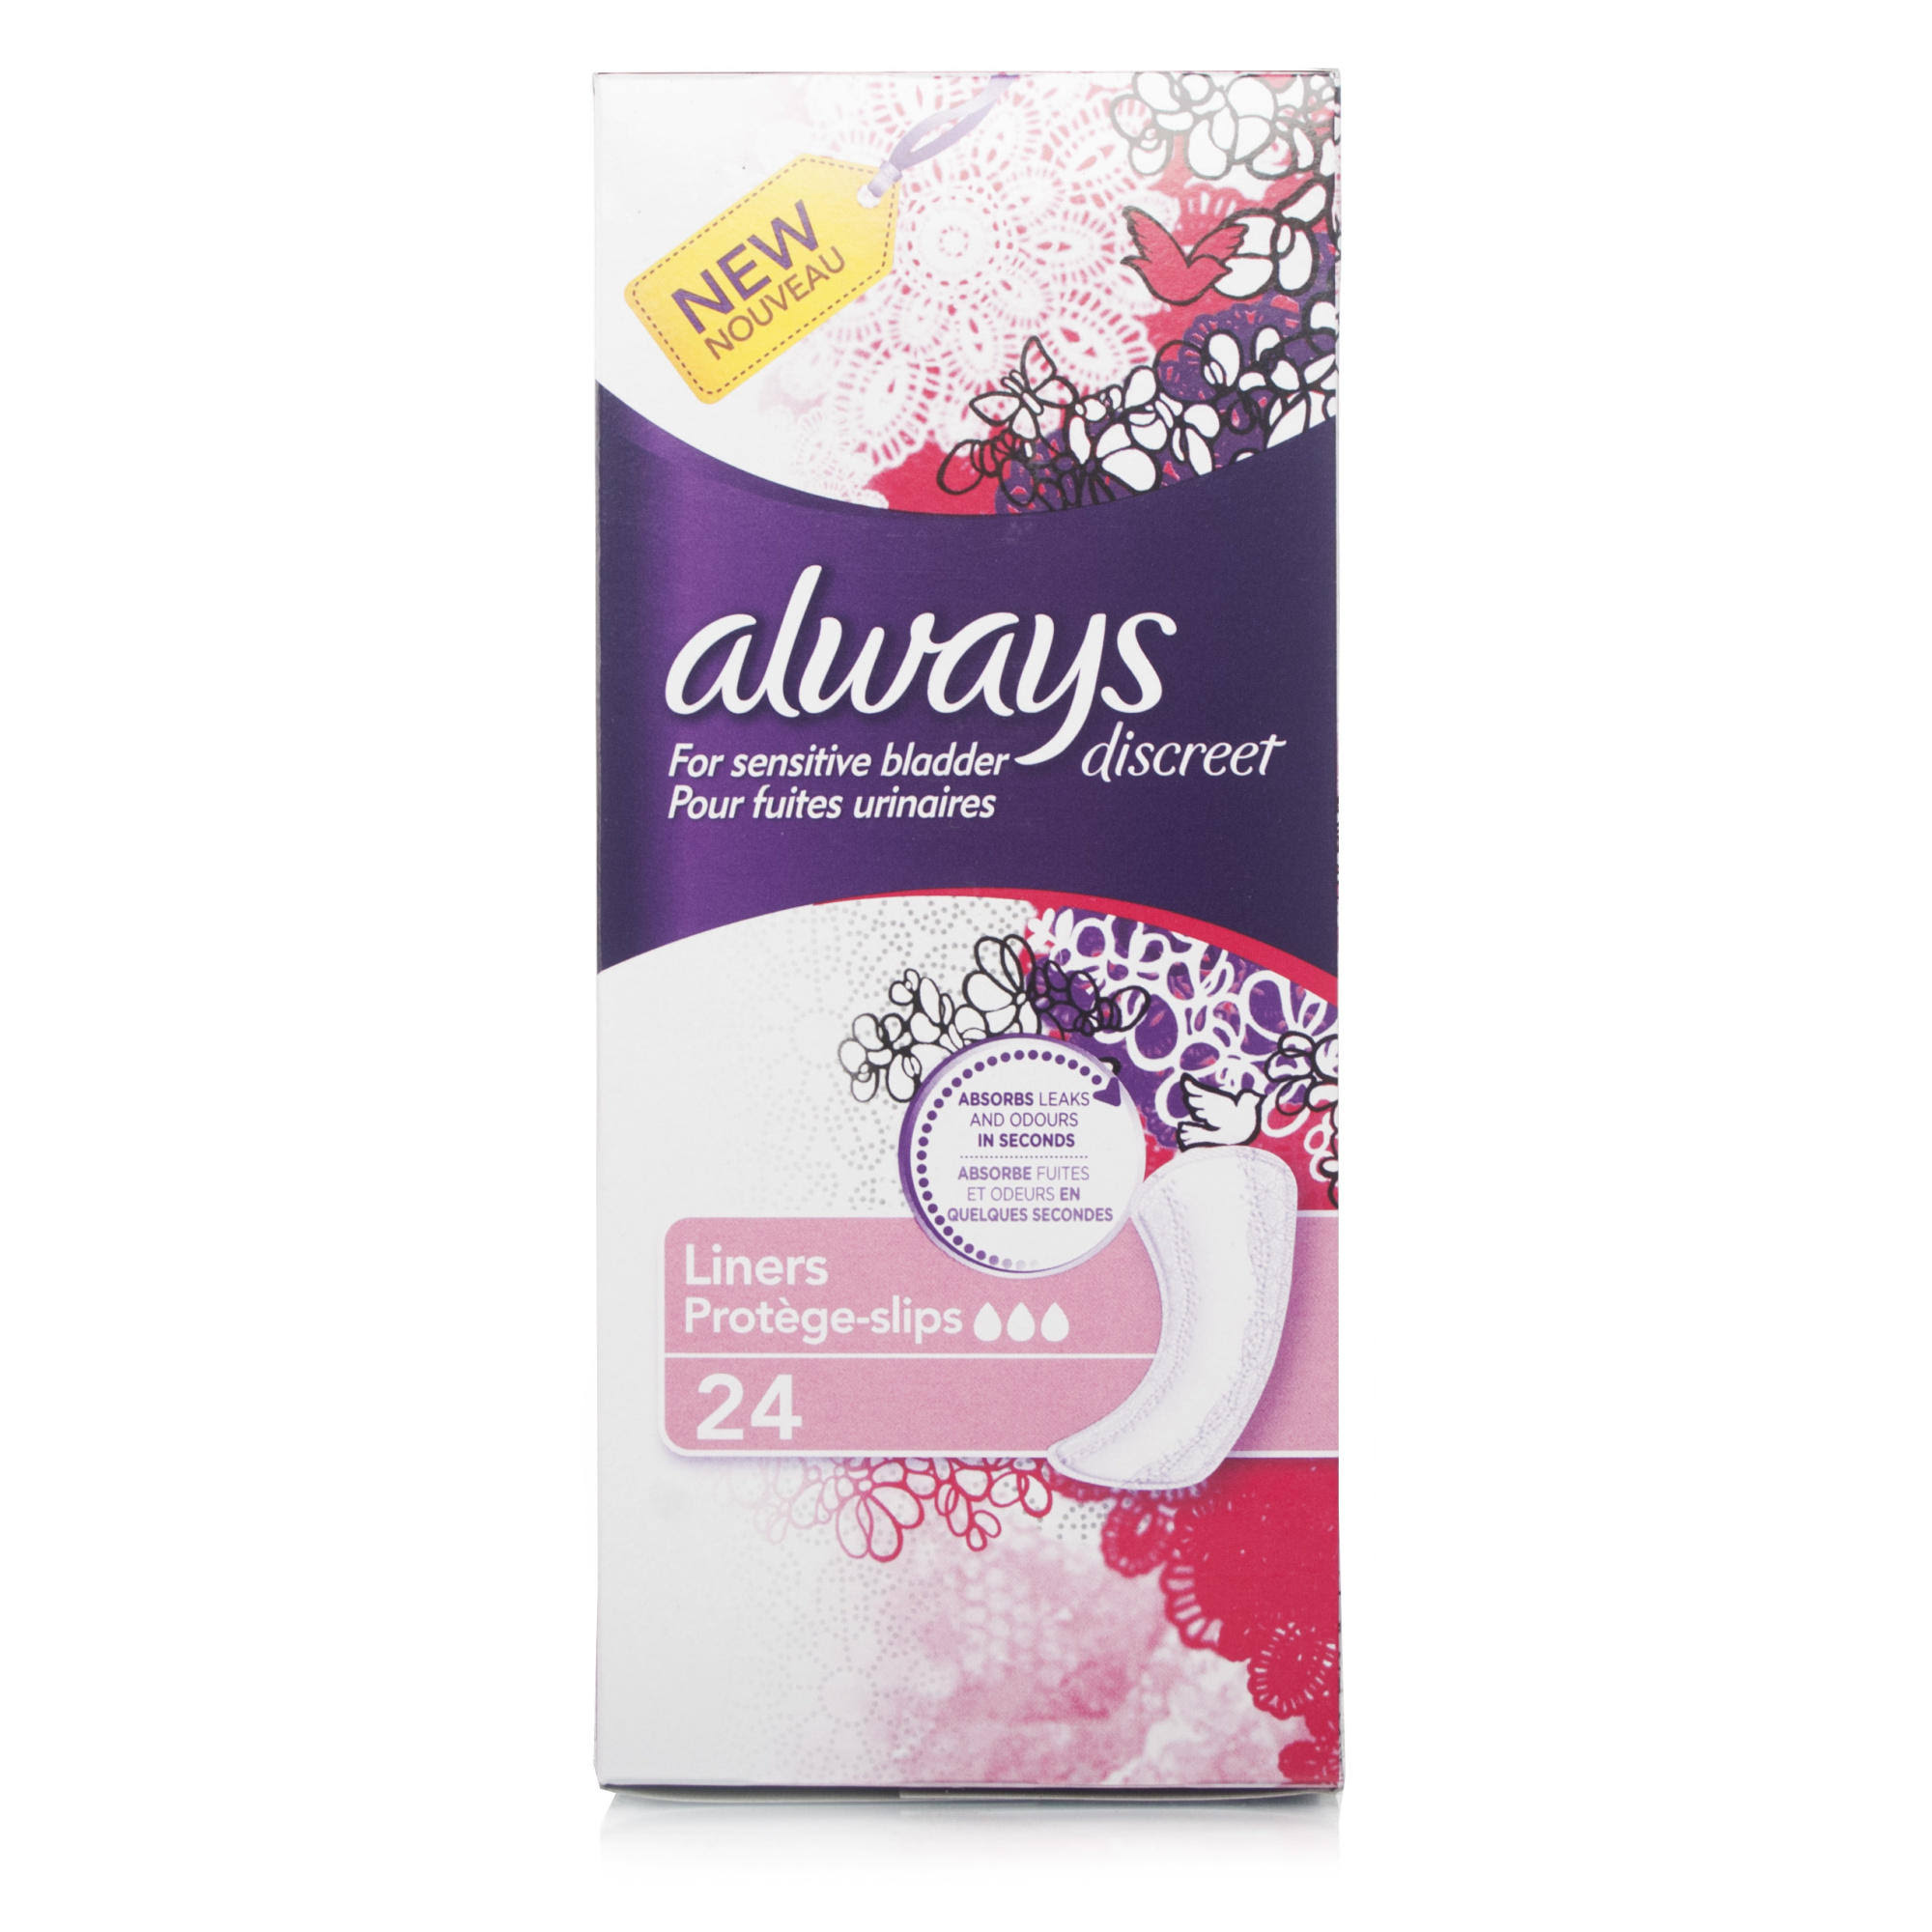 Always Discreet Incontinence Liners - 24pcs